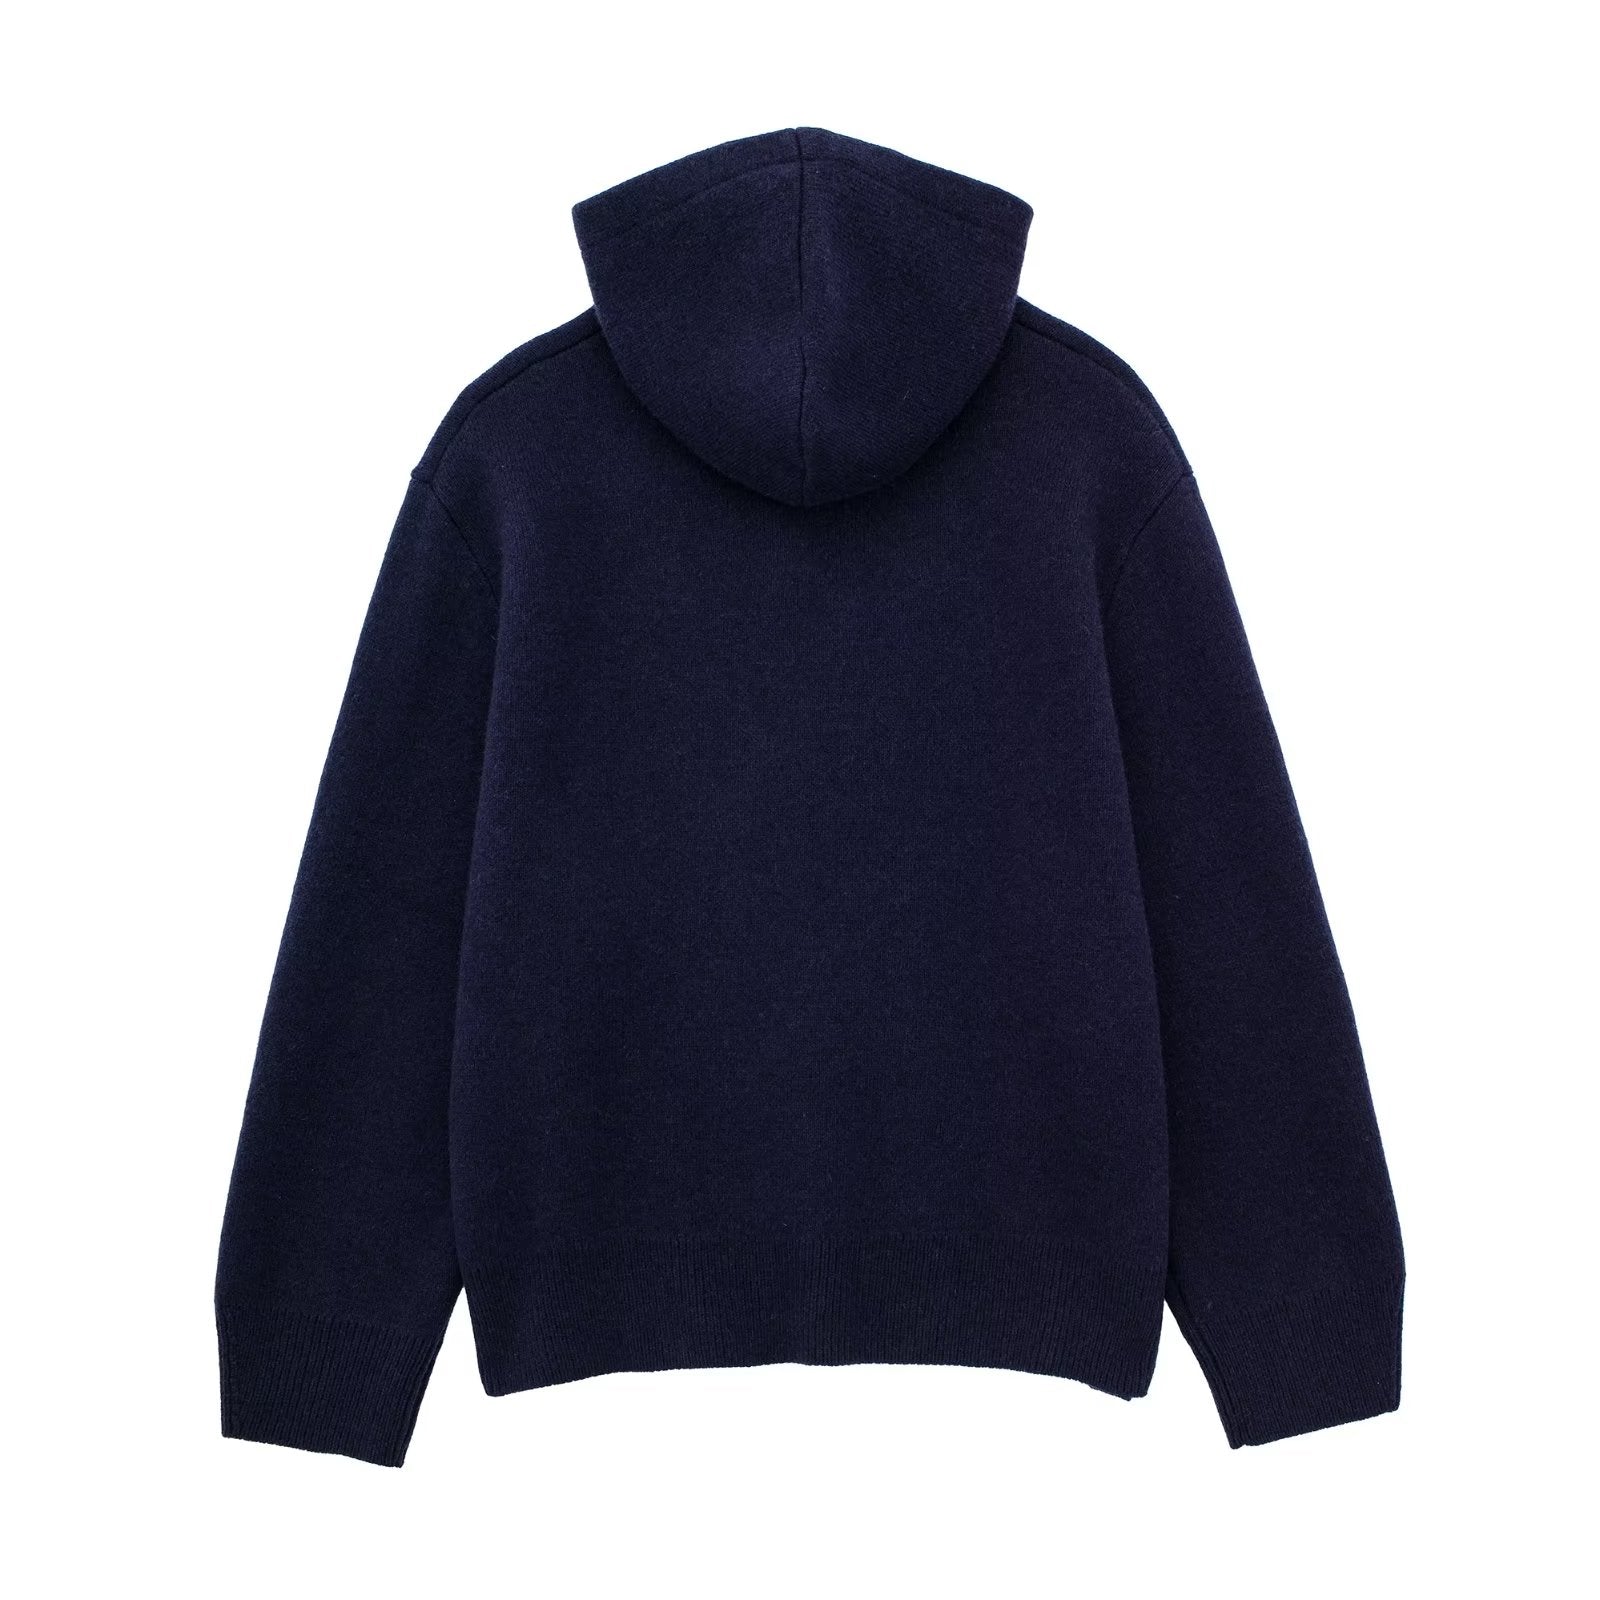 Cashmere Sweater Women Autumn Winter Western Knitted Hoodie Pullover Women Loose Lazy Cashmere Sweater